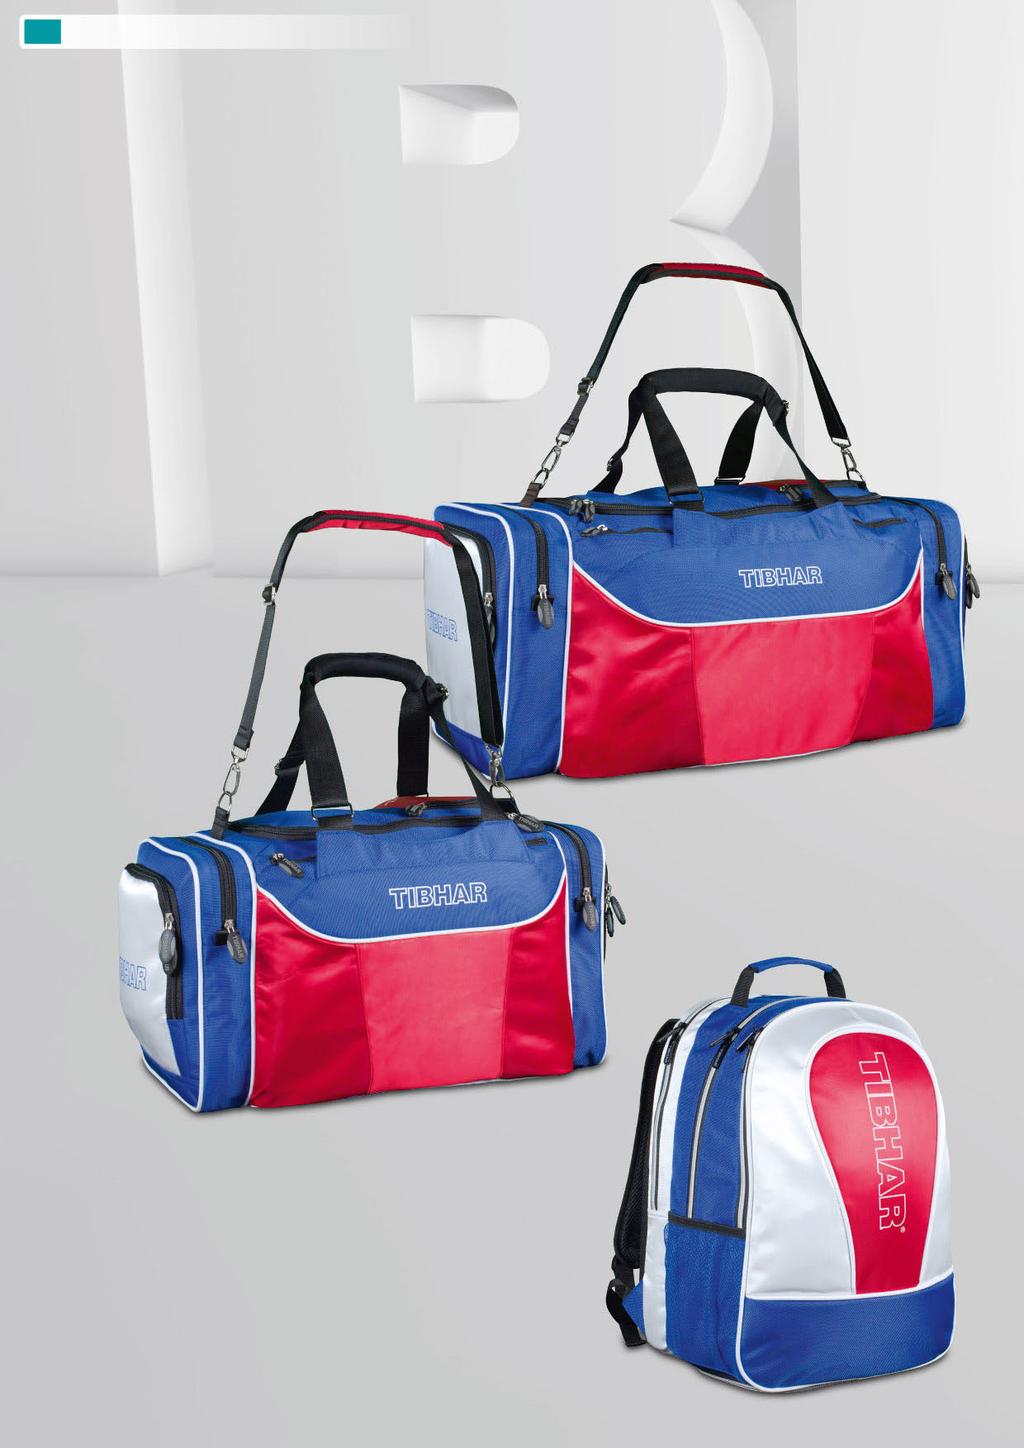 96 TREND BAG TREND LARGE Spacious sports bag featuring a big main compartment Side pockets for the small gear Composition: Polyester 1680 D / polyester Oxford Dimensions: 70 x 36 x 32 cm Colour: